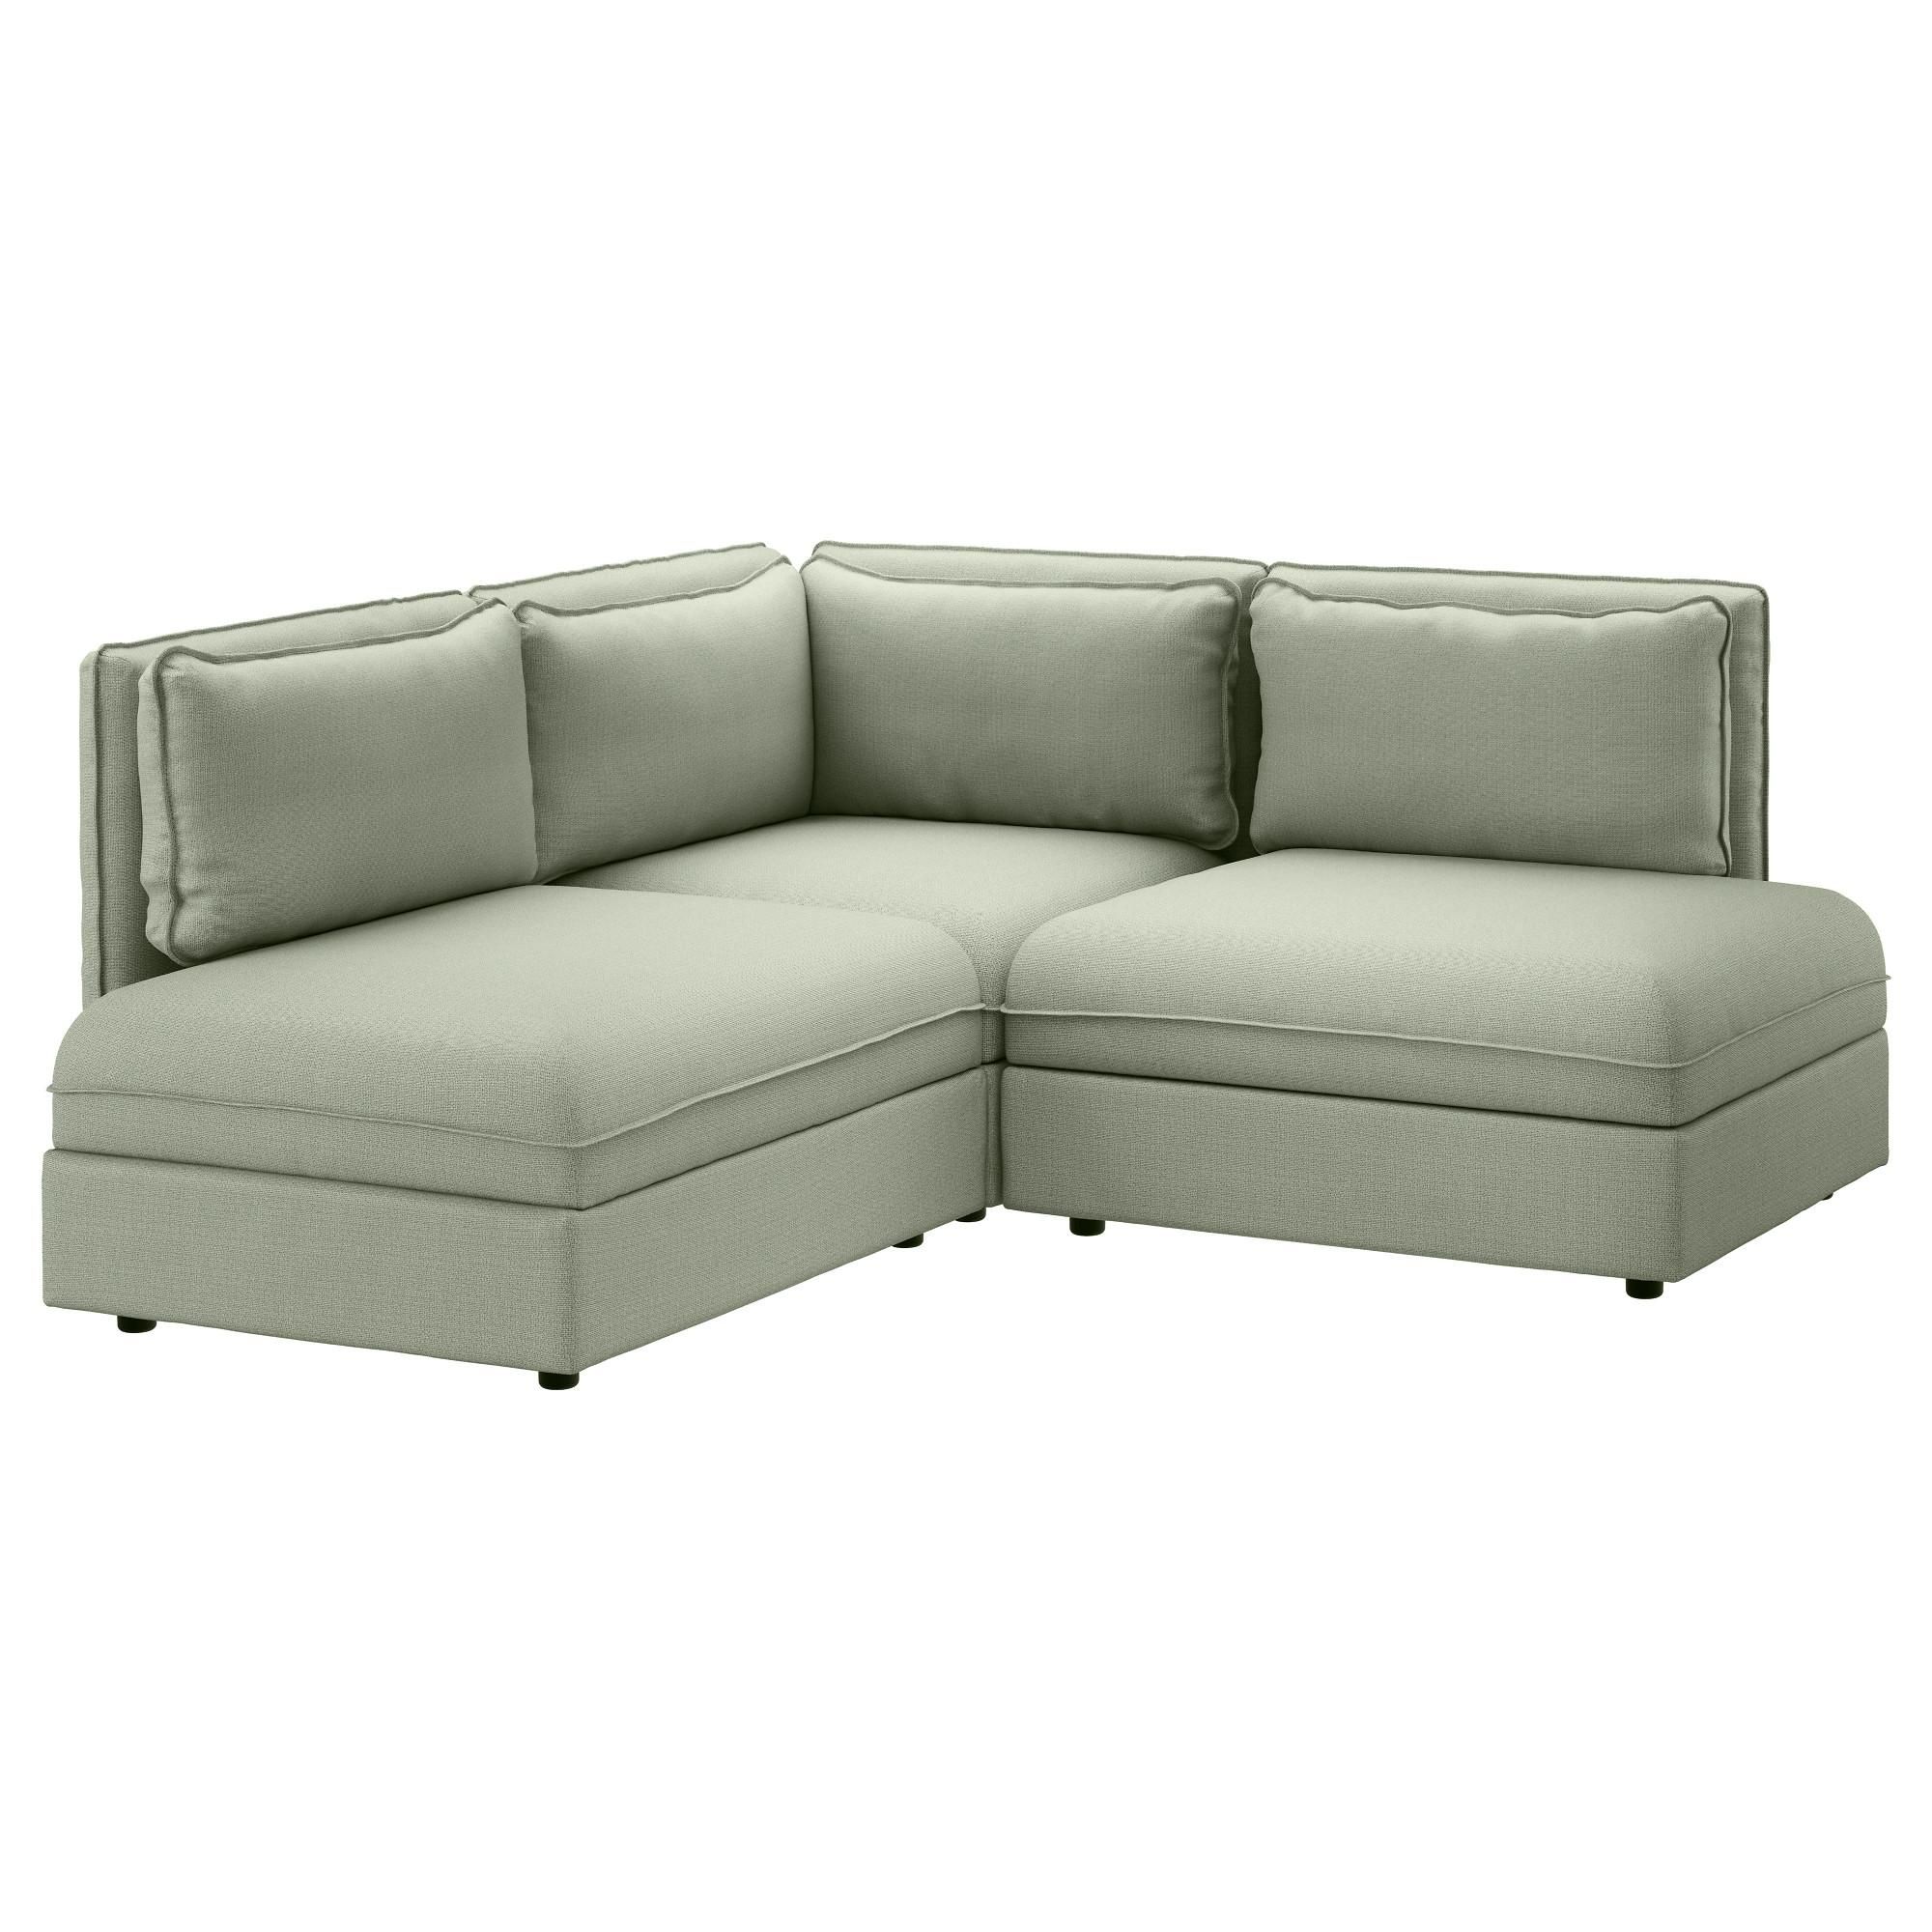 Furniture & Rug: Cheap Sectional Couches For Home Furniture Idea Intended For Individual Piece Sectional Sofas (View 15 of 20)